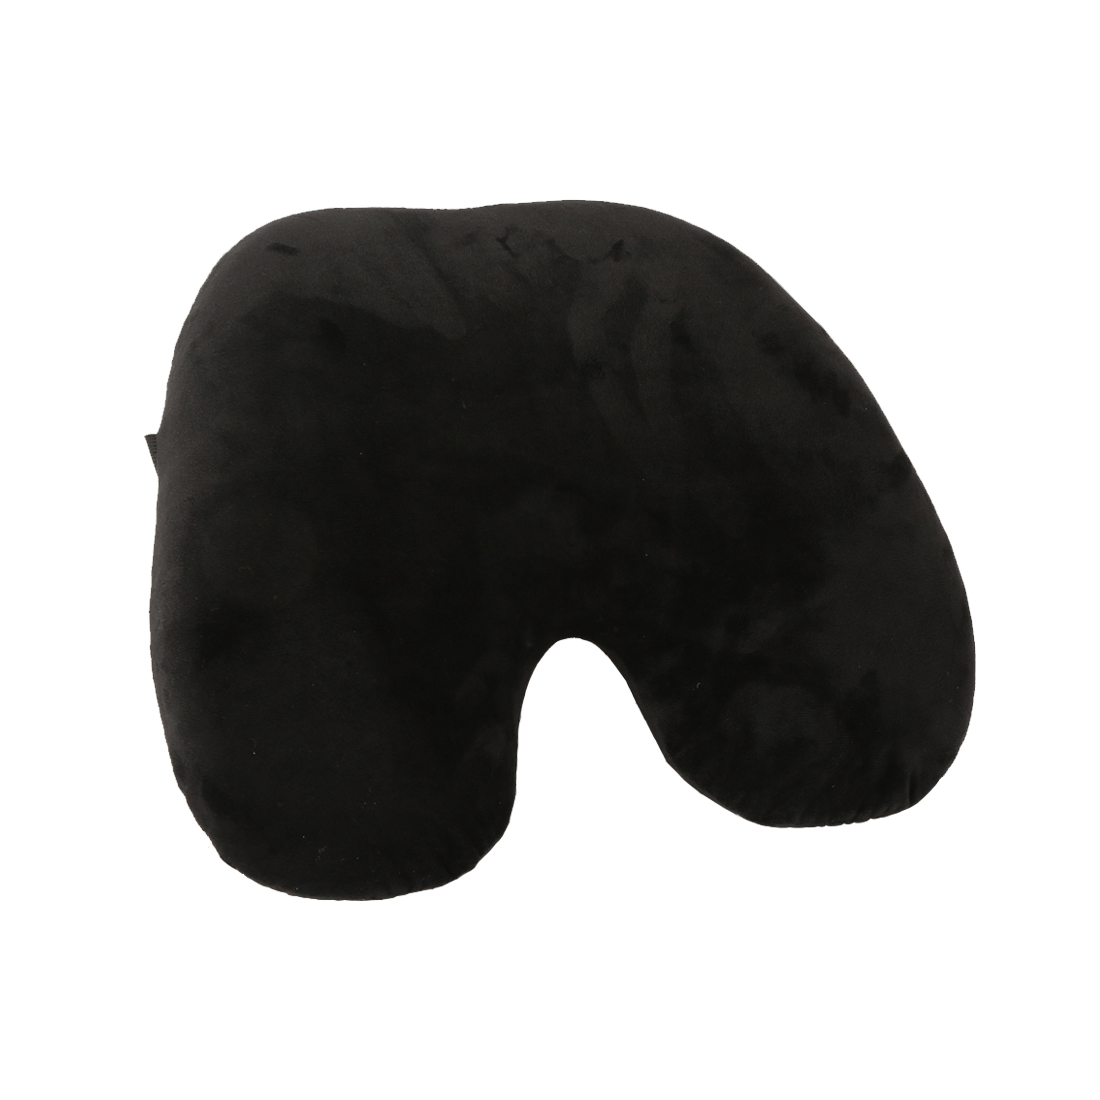 Black Premium Lumbar Support Pillow Designed for Lower Back Pain Relief - Ideal Back Cushion for Computer/Office Chair, Car Seat